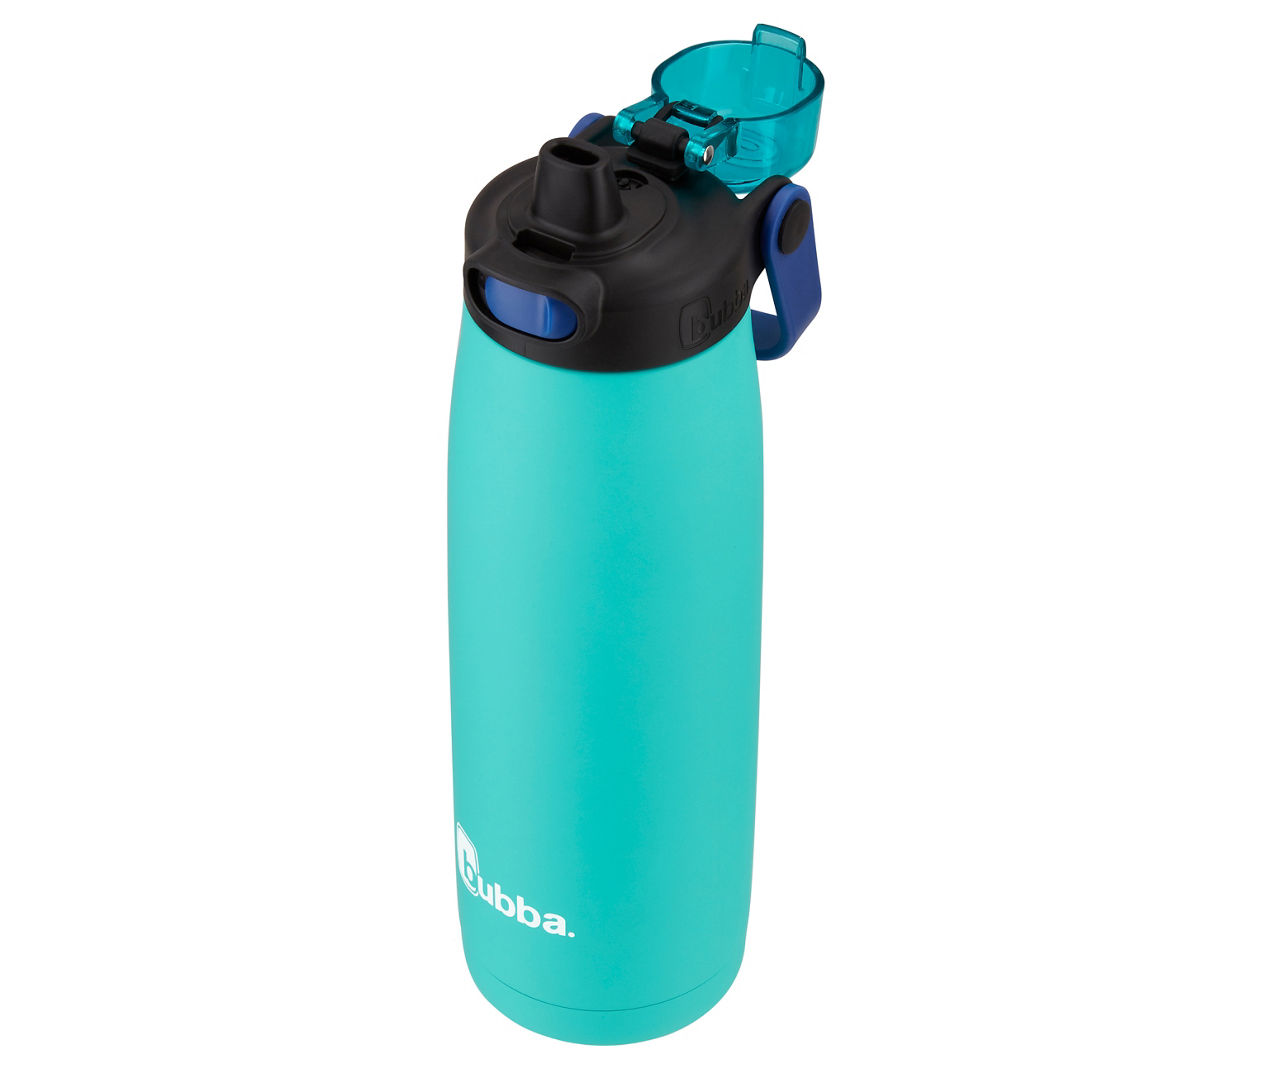 Bubba Teal Radiant Chug Stainless Steel Water Bottle, 24 Oz.